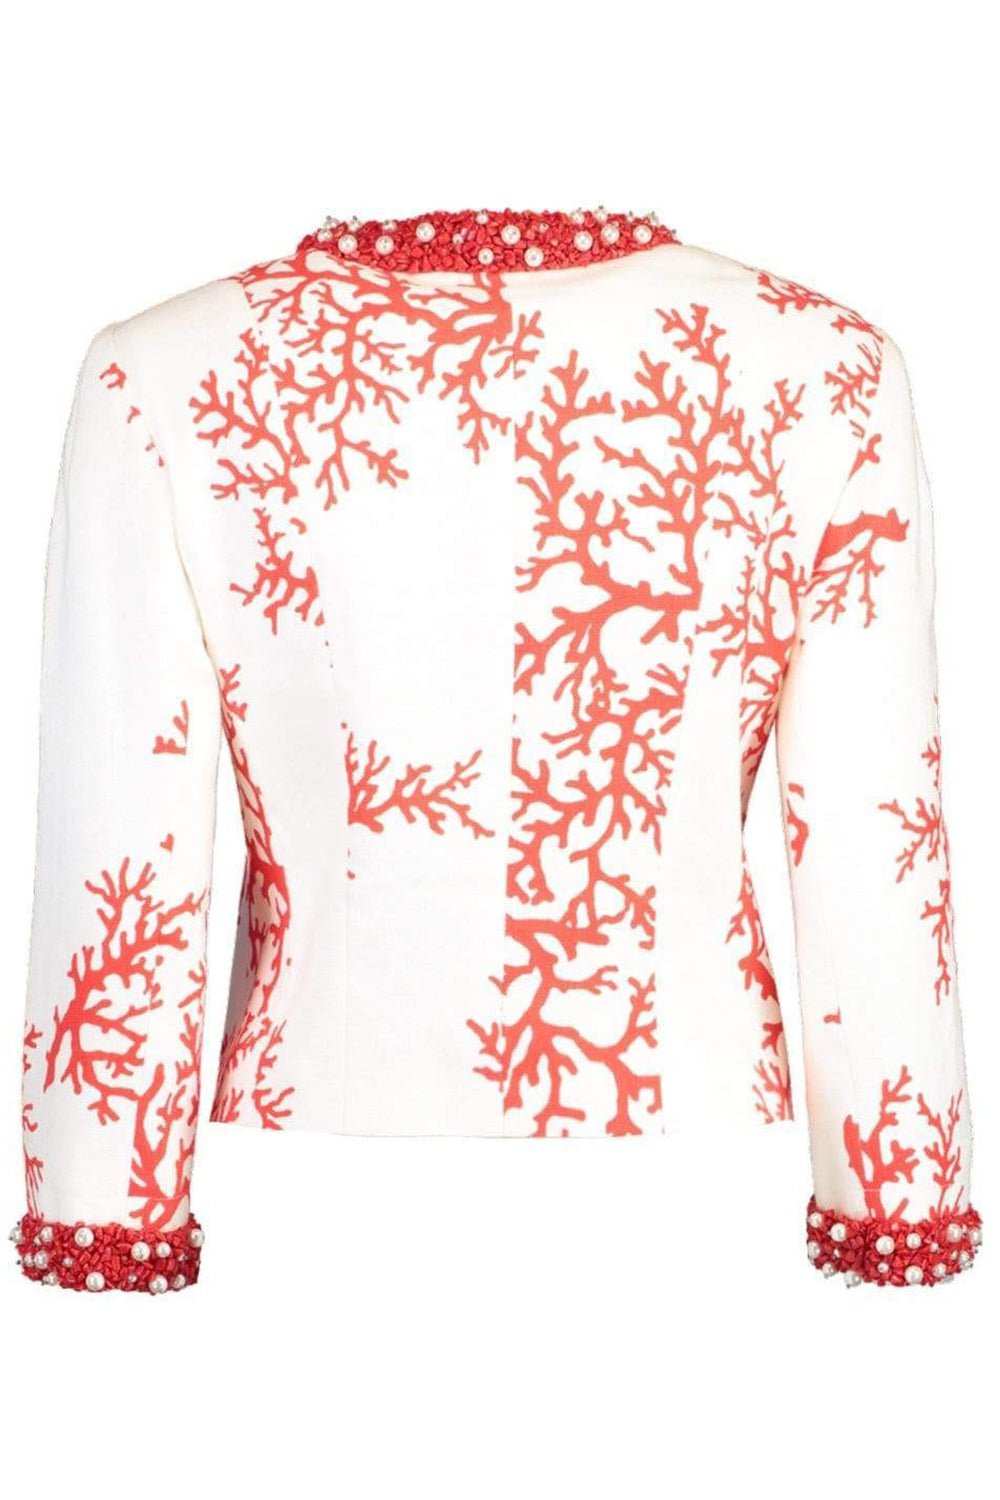 ANDREW GN-Coral Print Beaded Jacket-WHITE